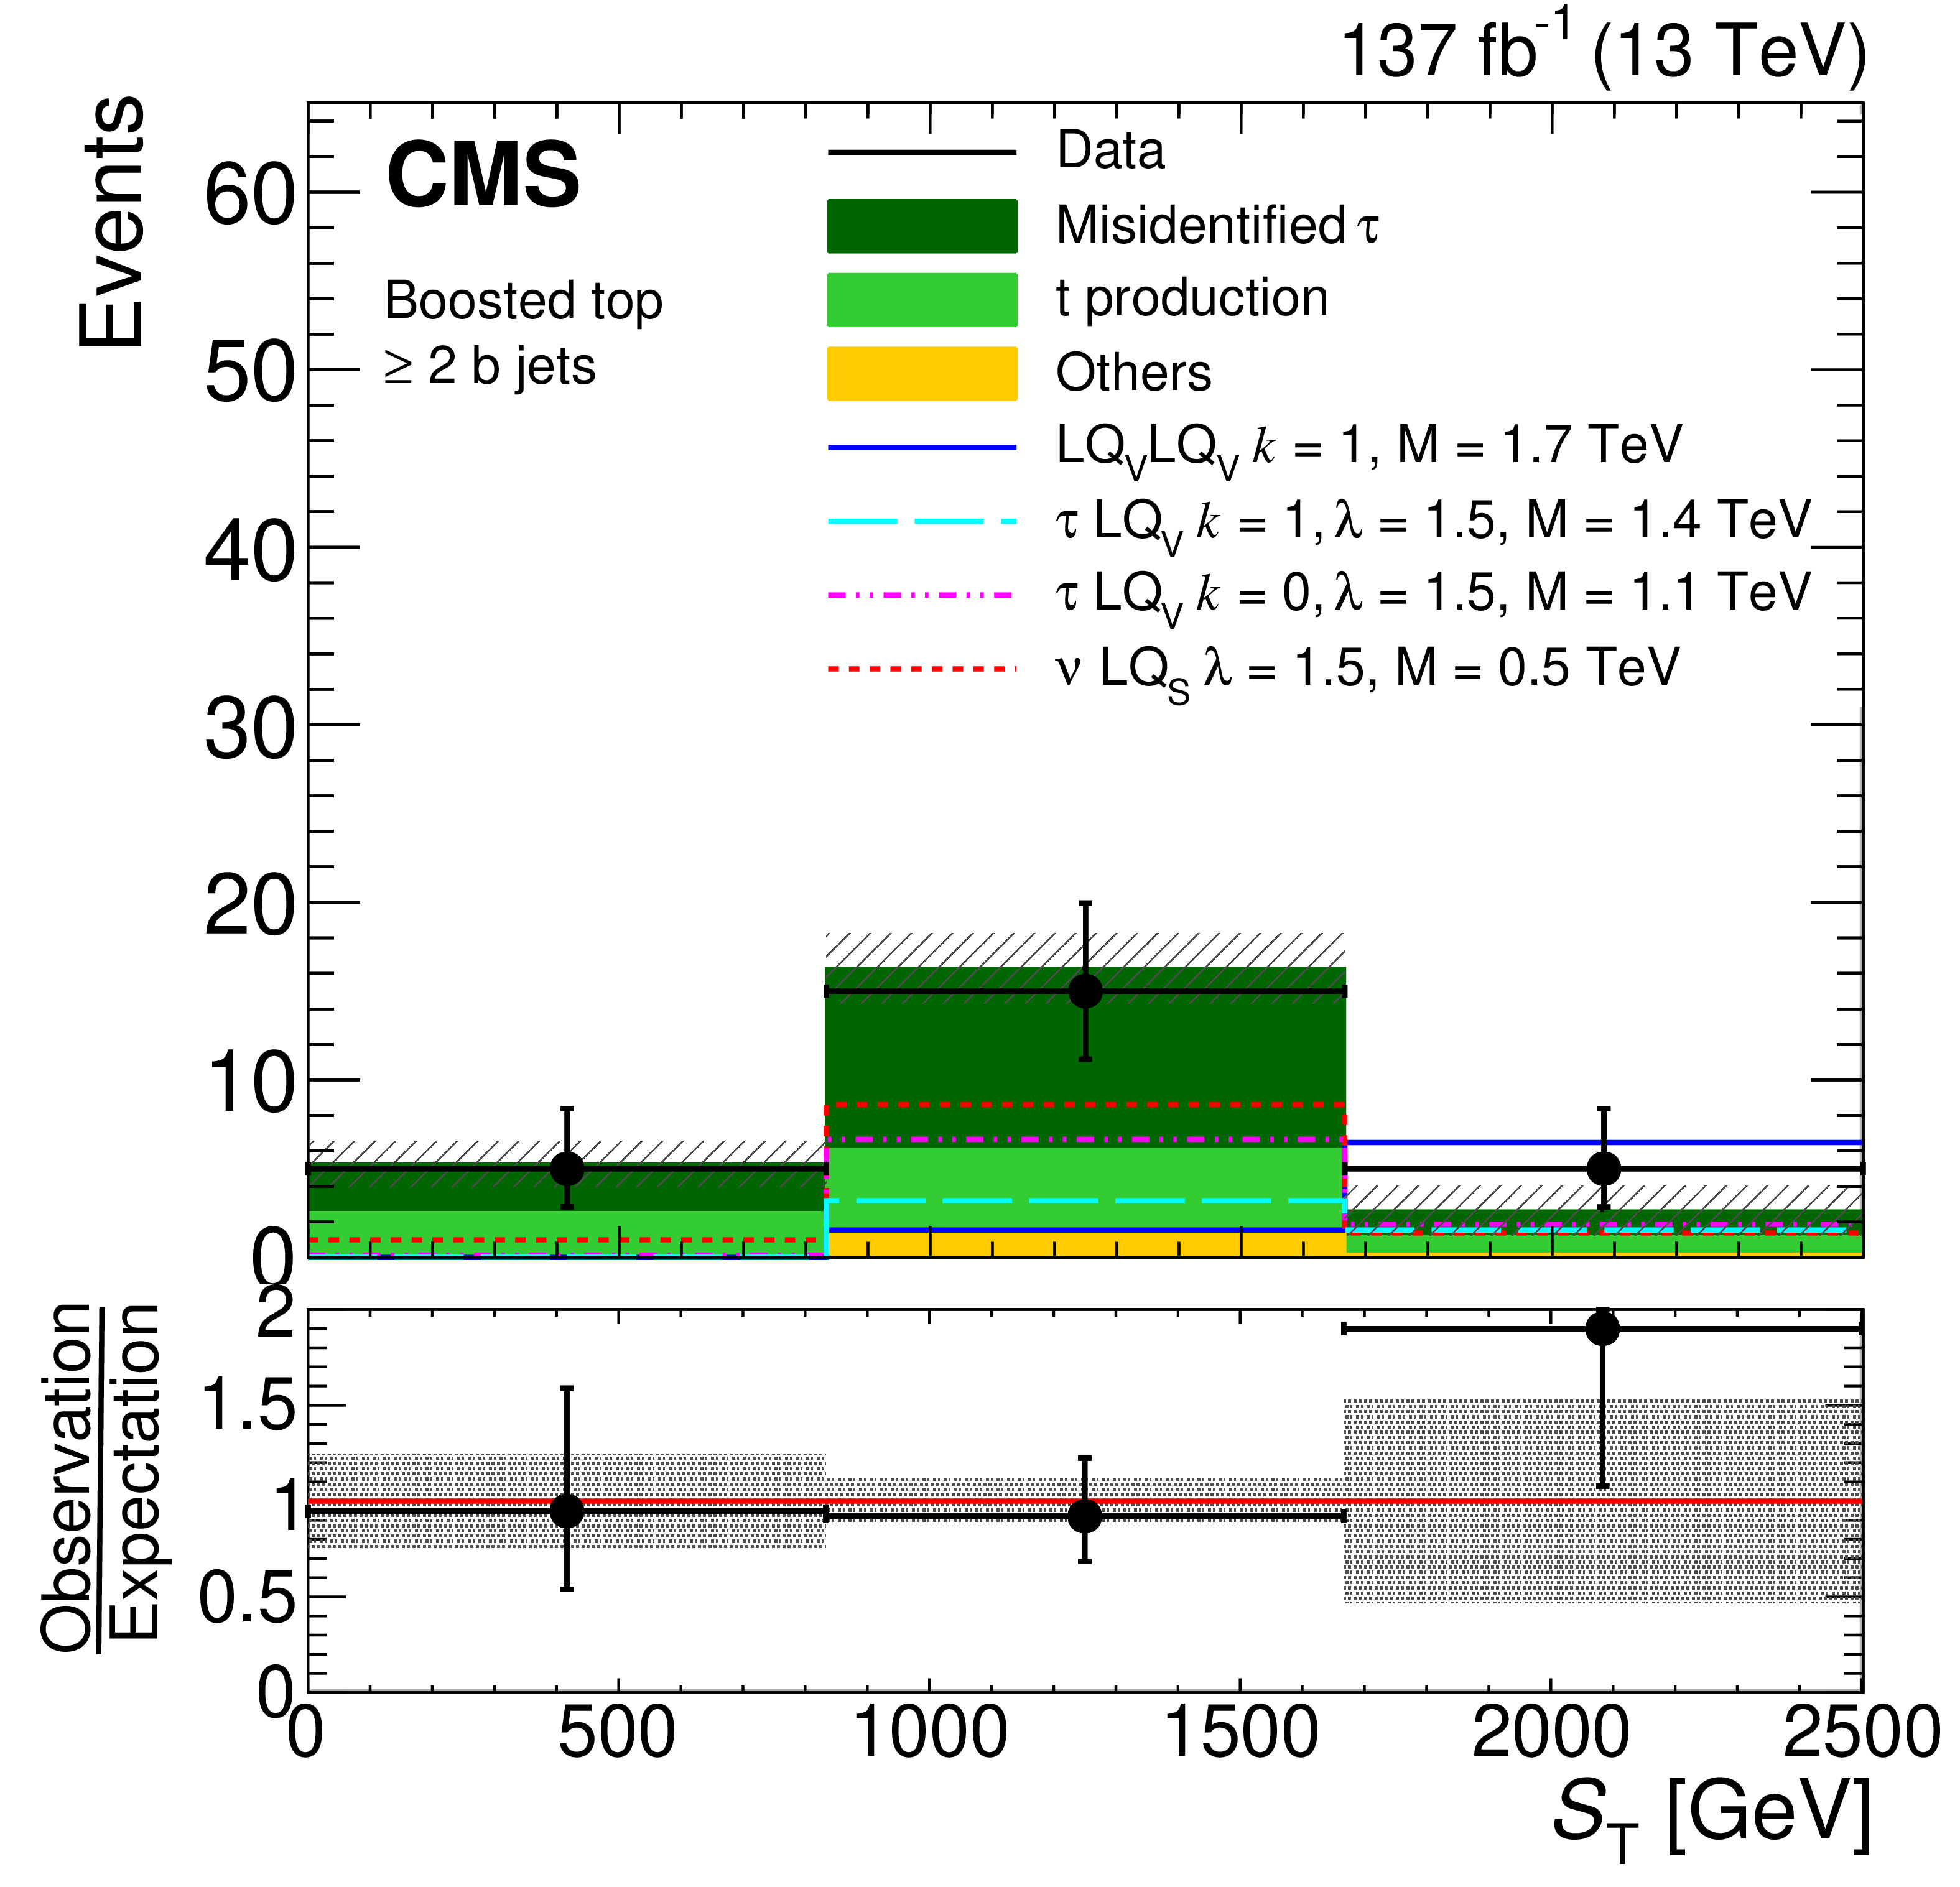 figure of the variable ST, comparing data to simulation and various leptoquark models